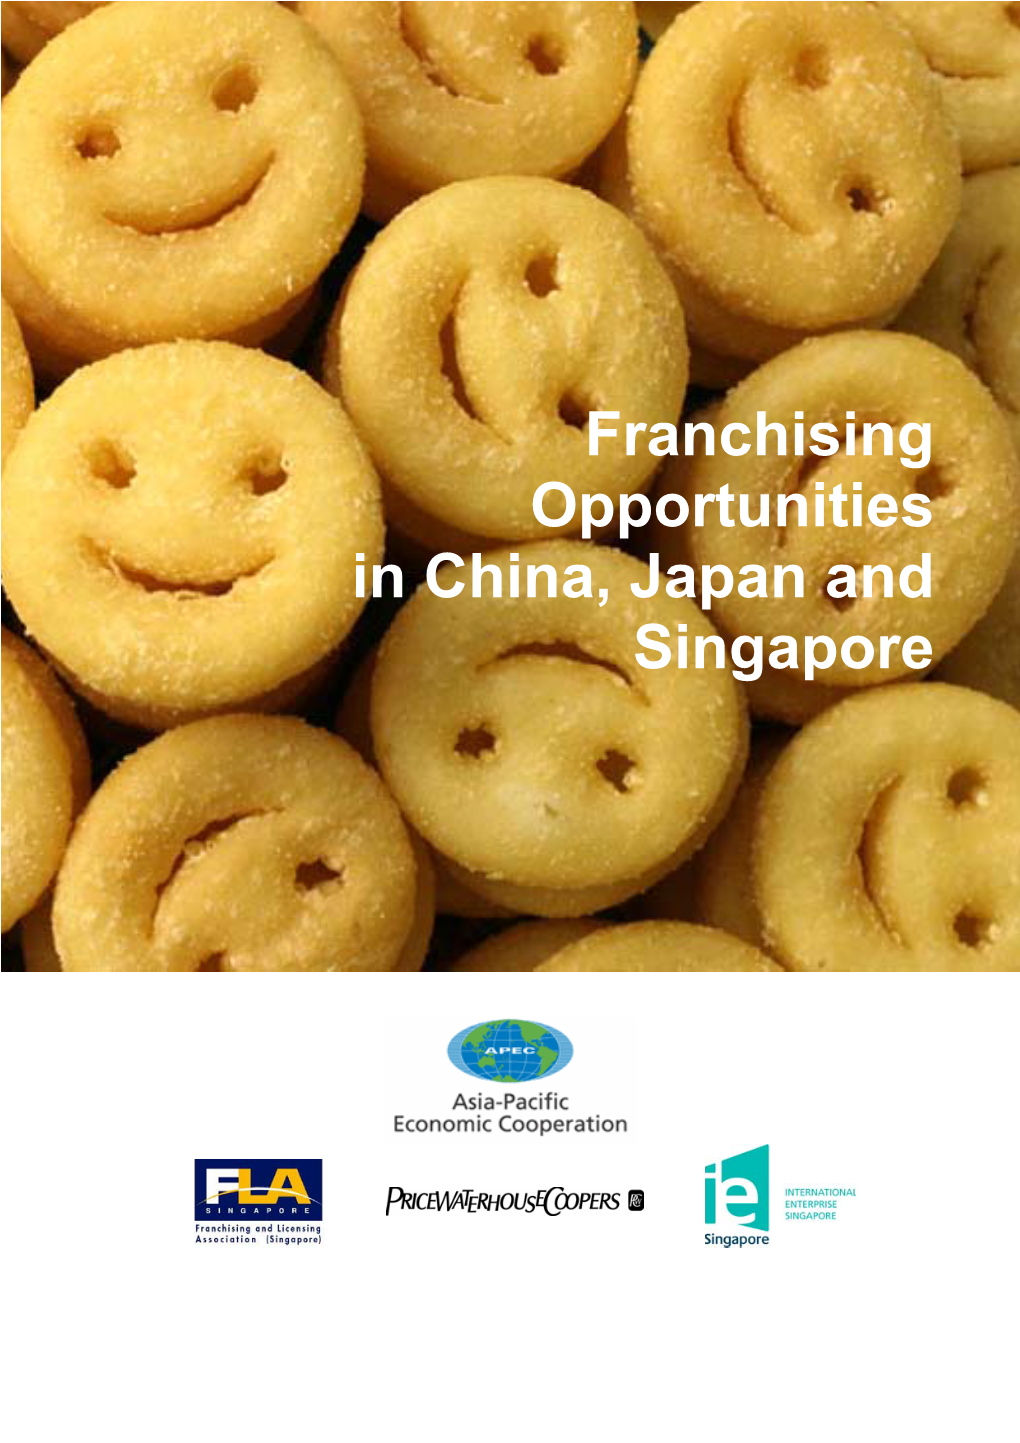 Franchising Opportunities in China, Japan and Singapore